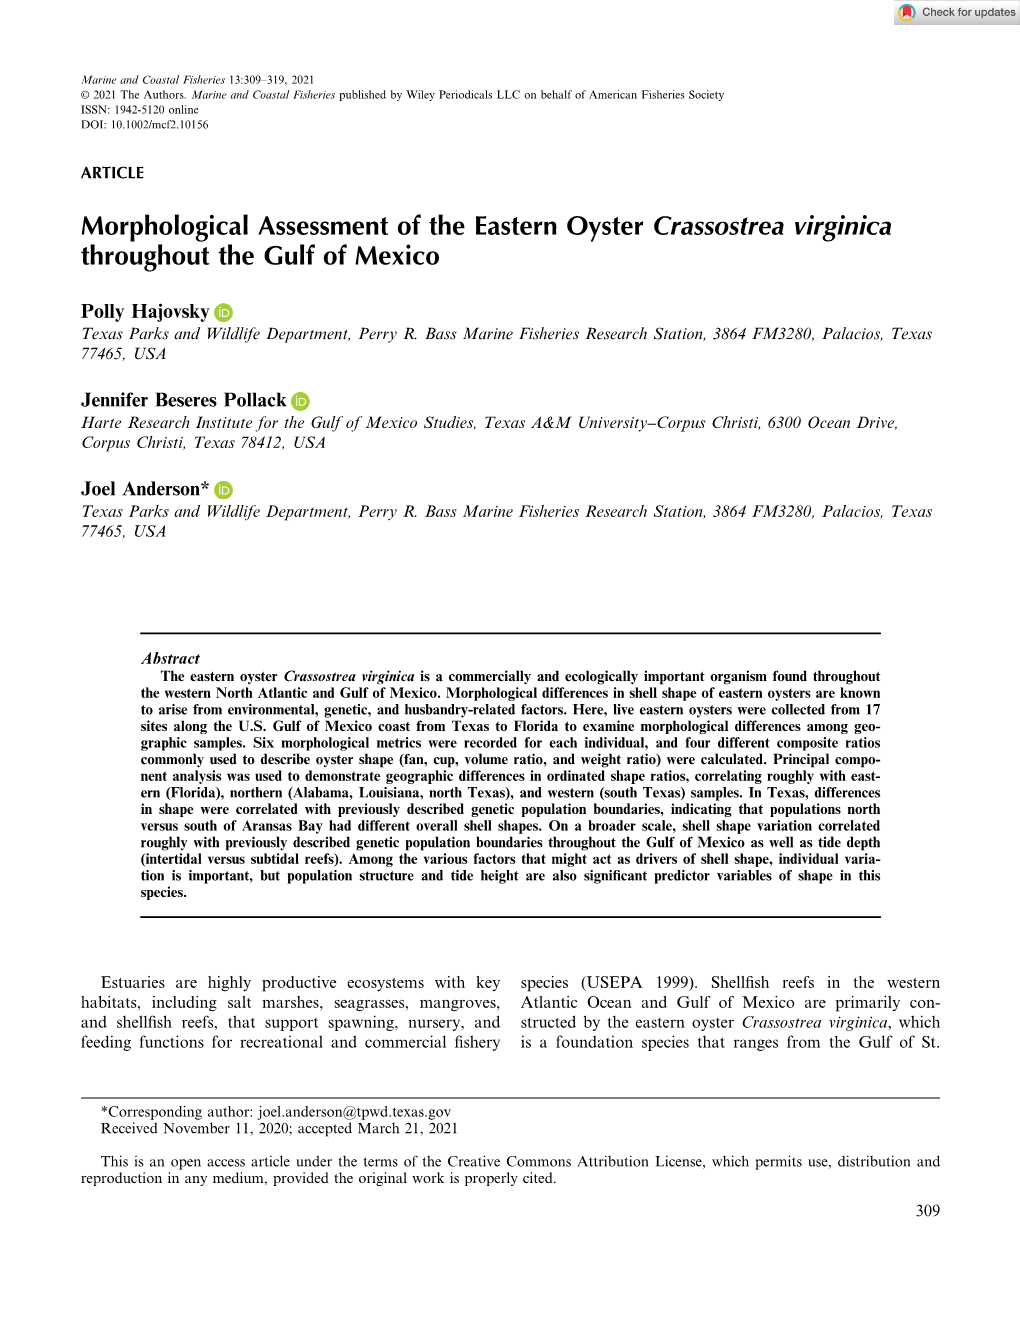 Morphological Assessment of the Eastern Oyster Crassostrea Virginica Throughout the Gulf of Mexico